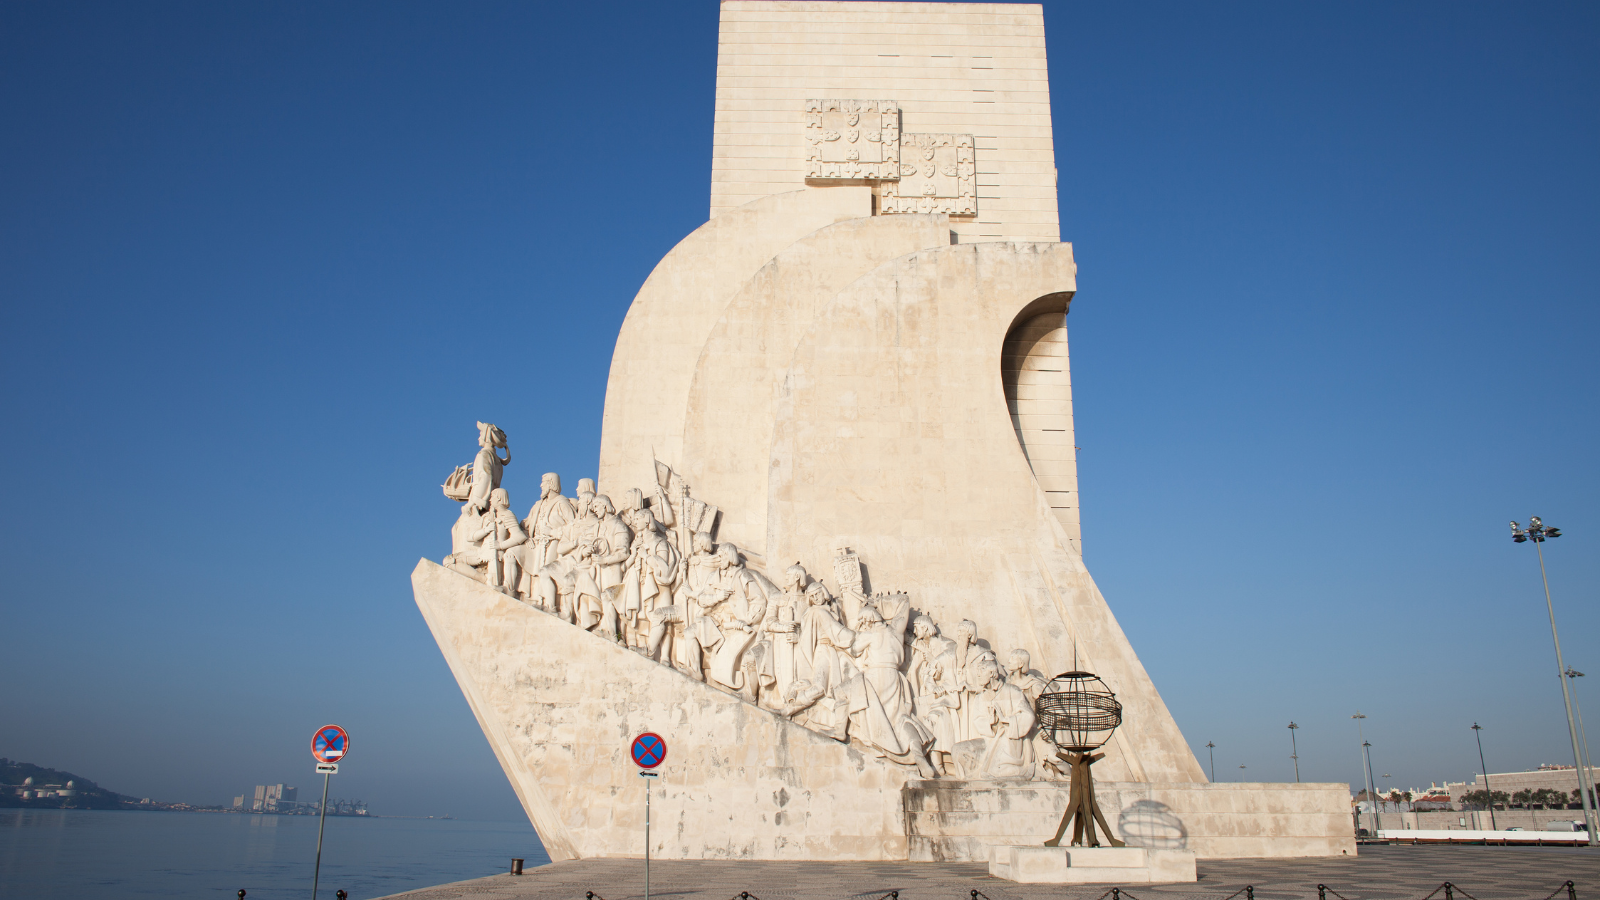 Delve into history in Belém, Lisbon - the first thing in the list of 10 best things to do in Portugal